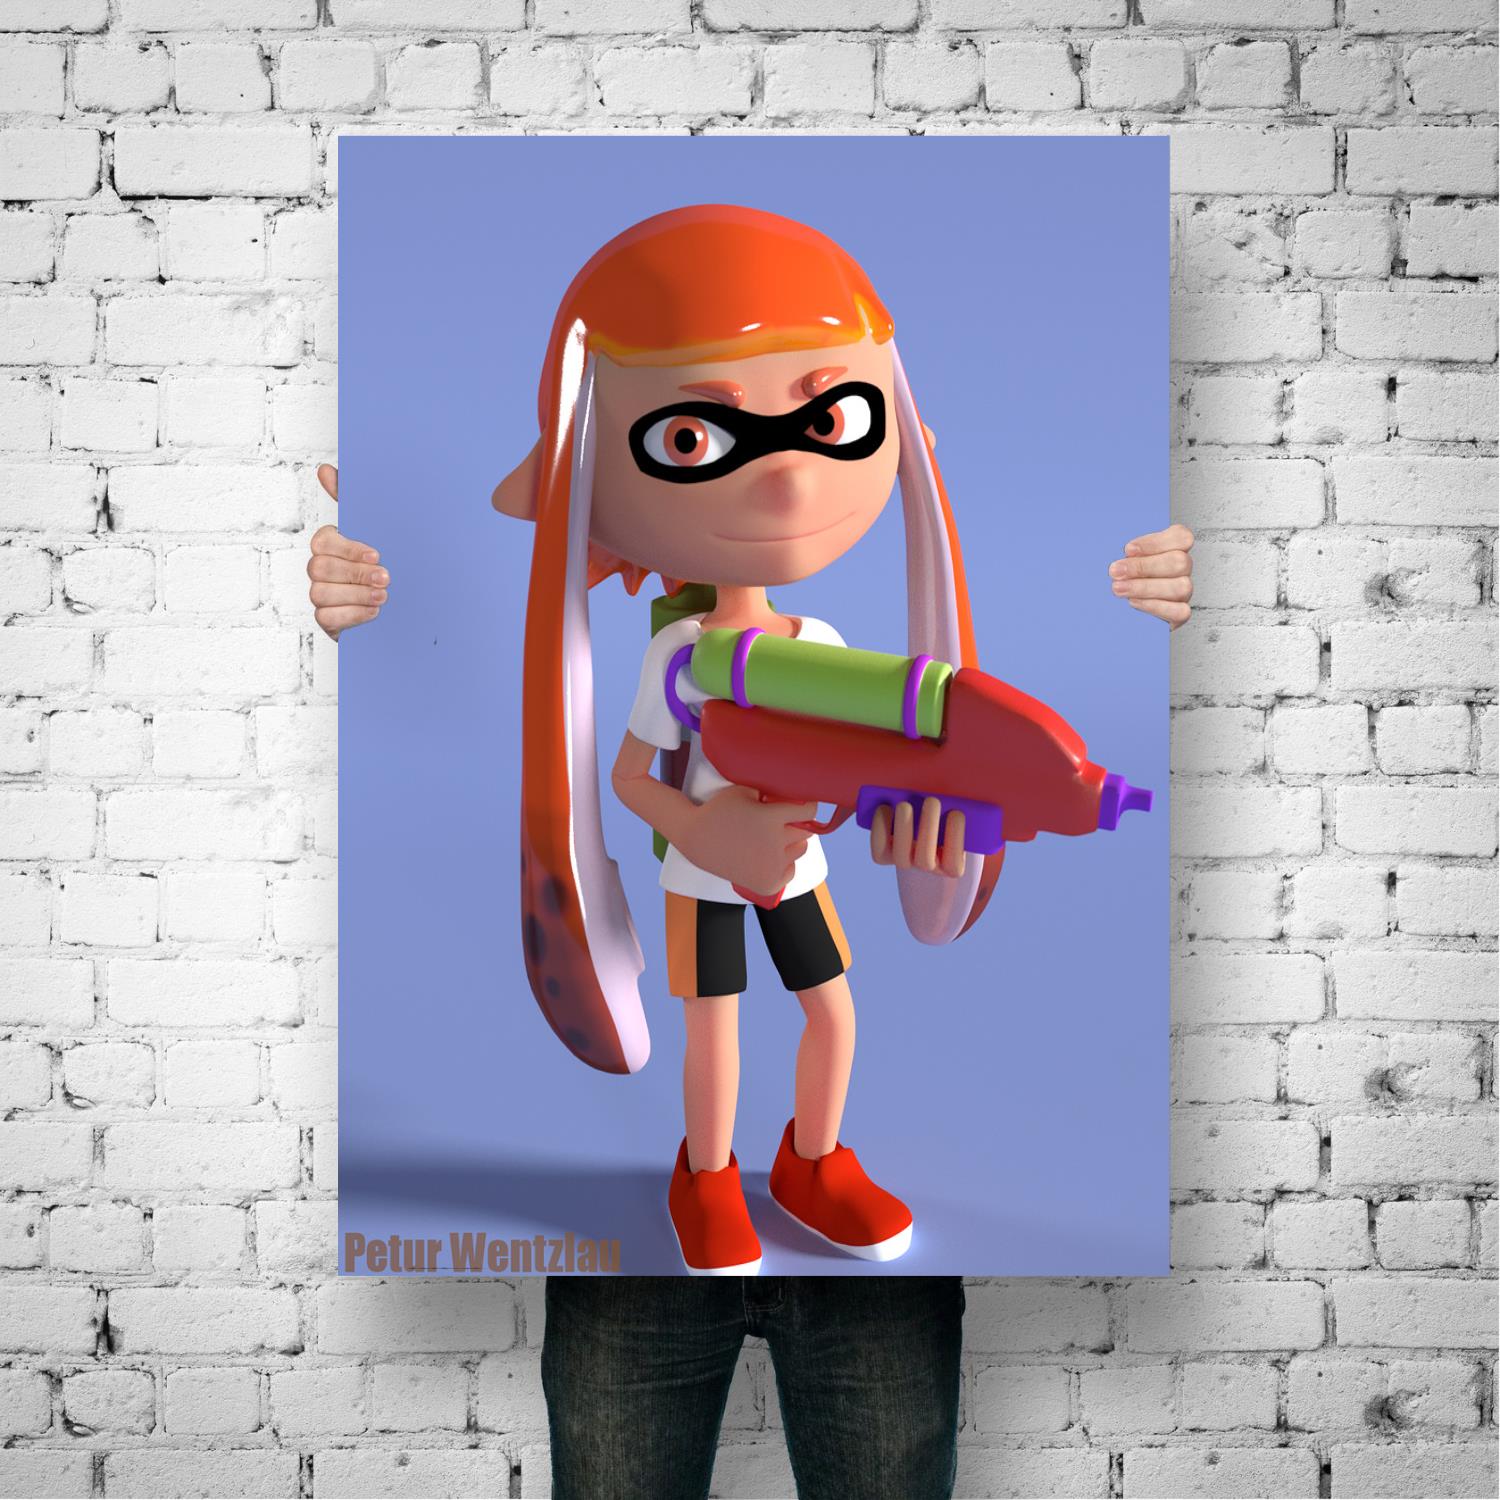 Splatoon Character Stack poster Decorative Canvas Posters Room Bar Cafe Decor Gift Print Art Wall Paintings 2 - Splatoon Plush